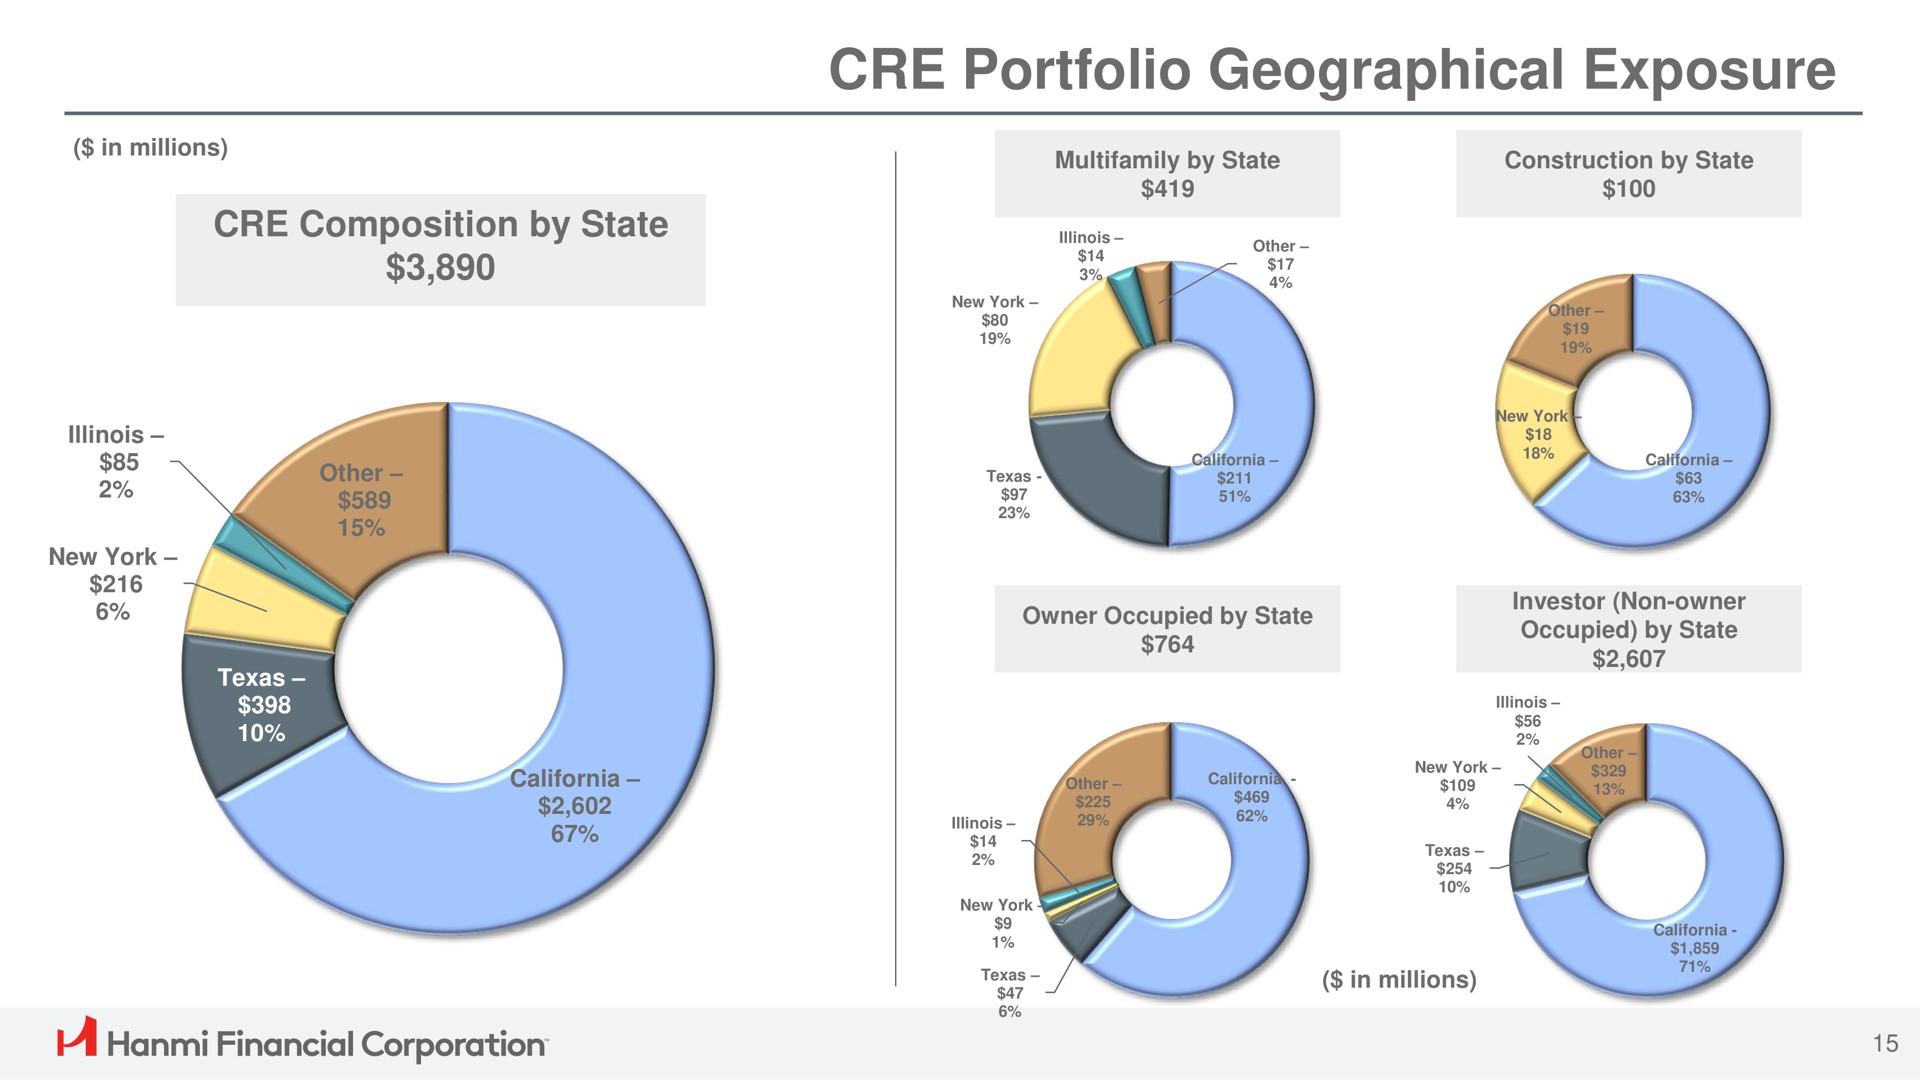 composition by state portfolio geographical exposure ies financial corporation | Hanmi Financial